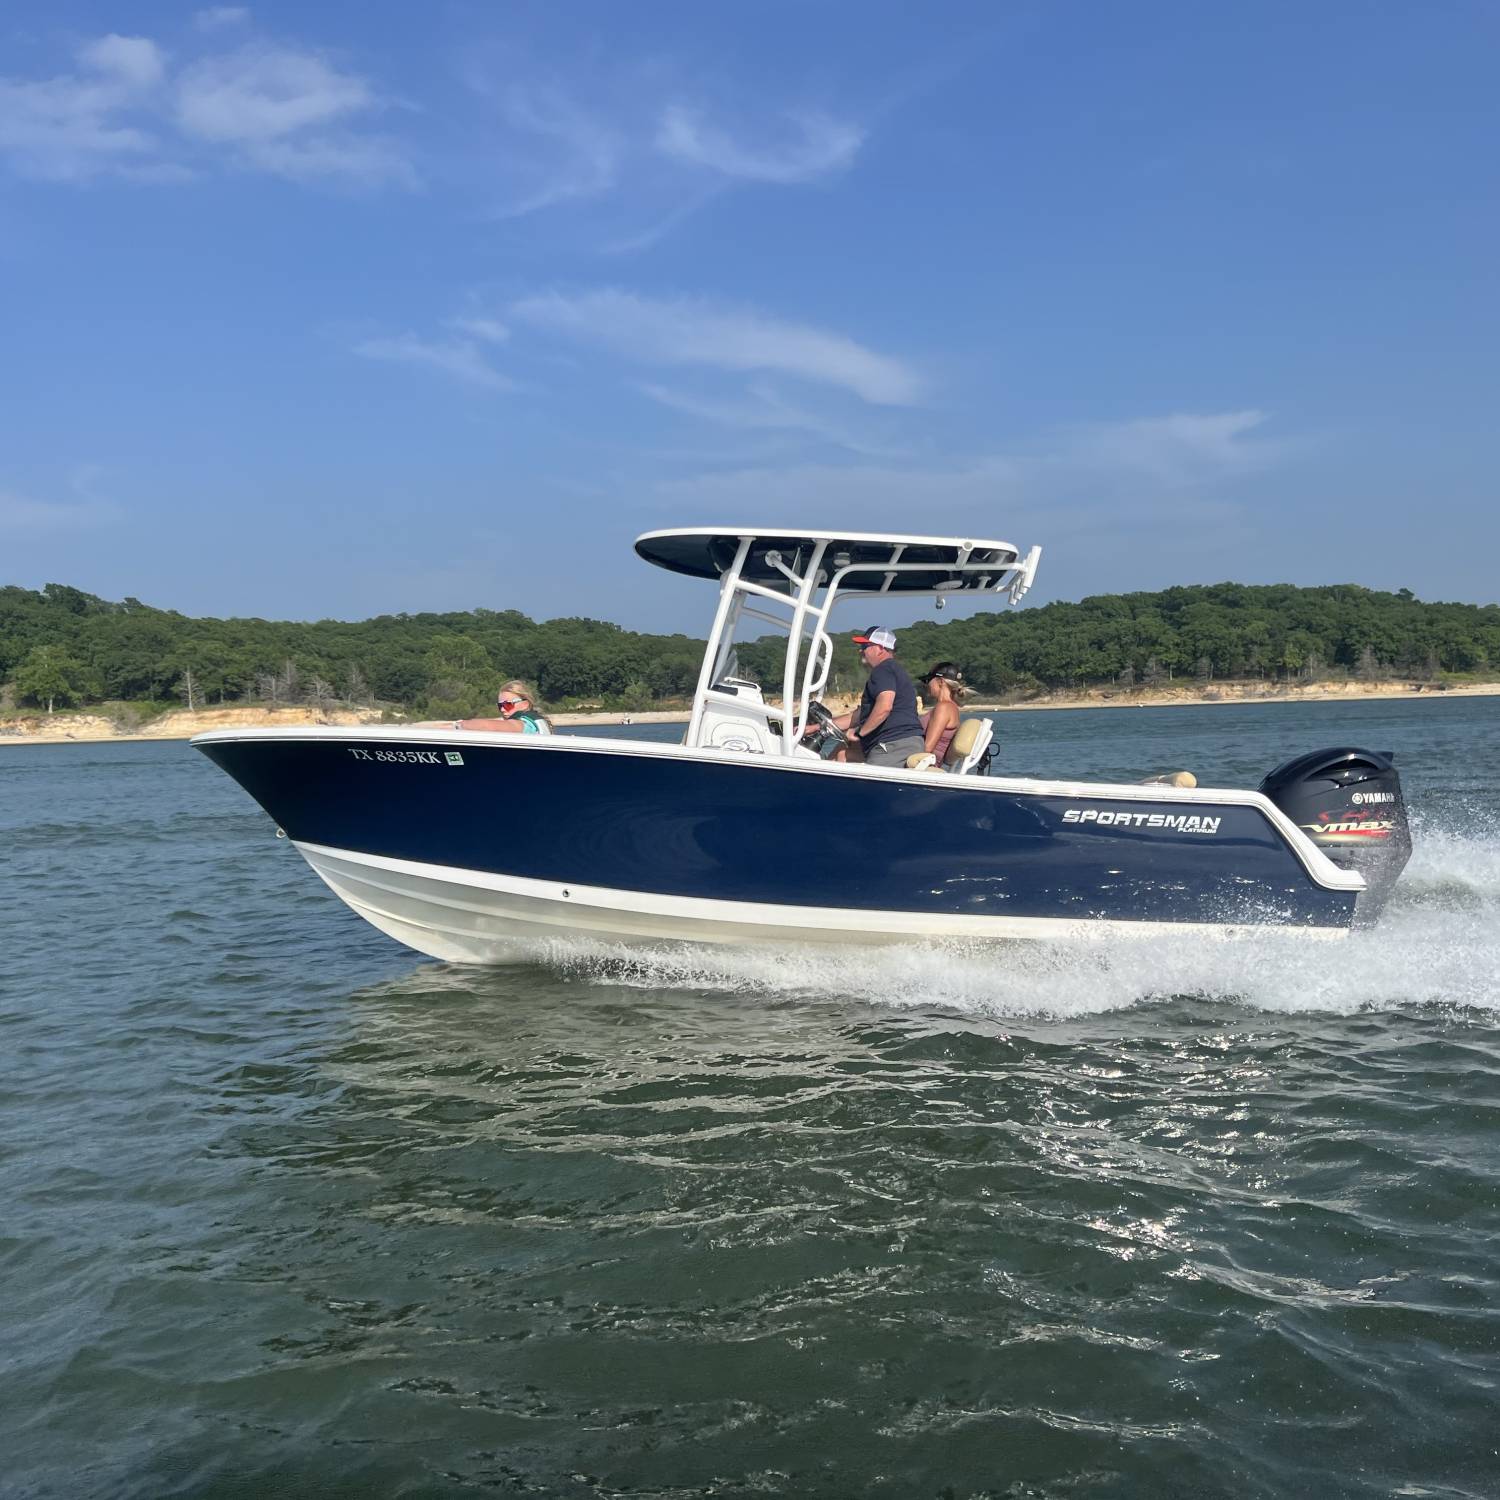 Title: First day back on the water in 2023 - On board their Sportsman Heritage 231 Center Console - Location: Lake Texoma. Participating in the Photo Contest #SportsmanMay2023